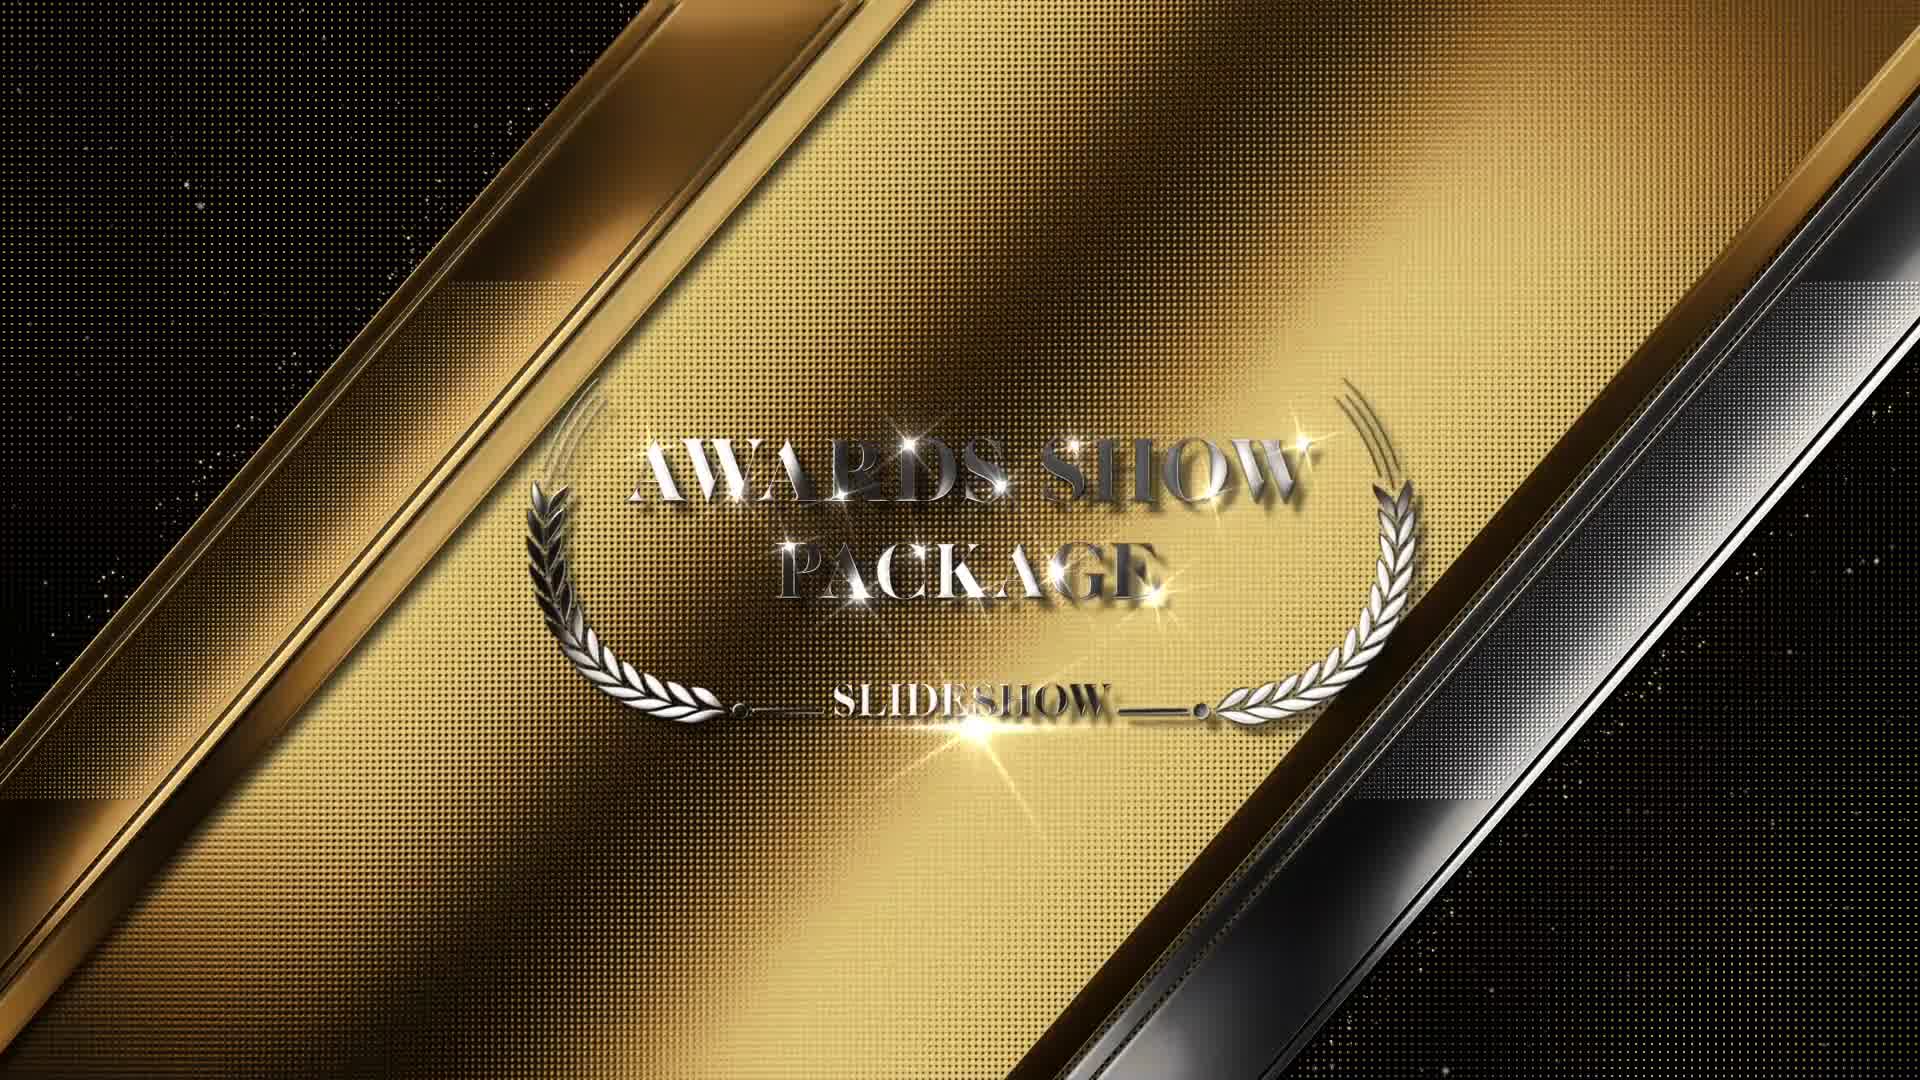 awards after effects download